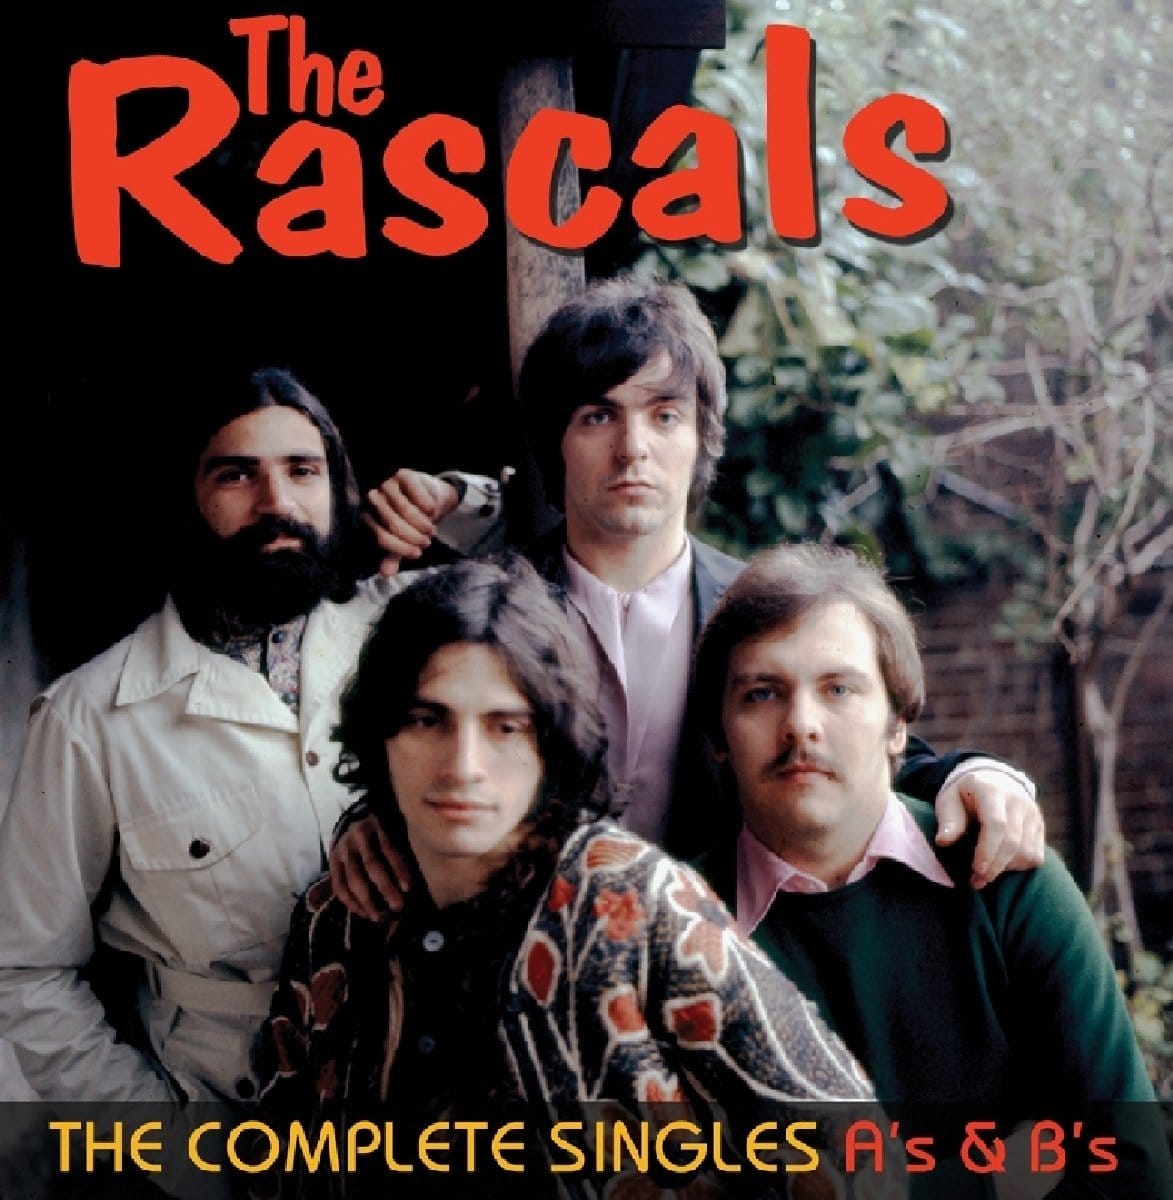 The Rascals: The Complete Singles A's & B's - American Songwriter